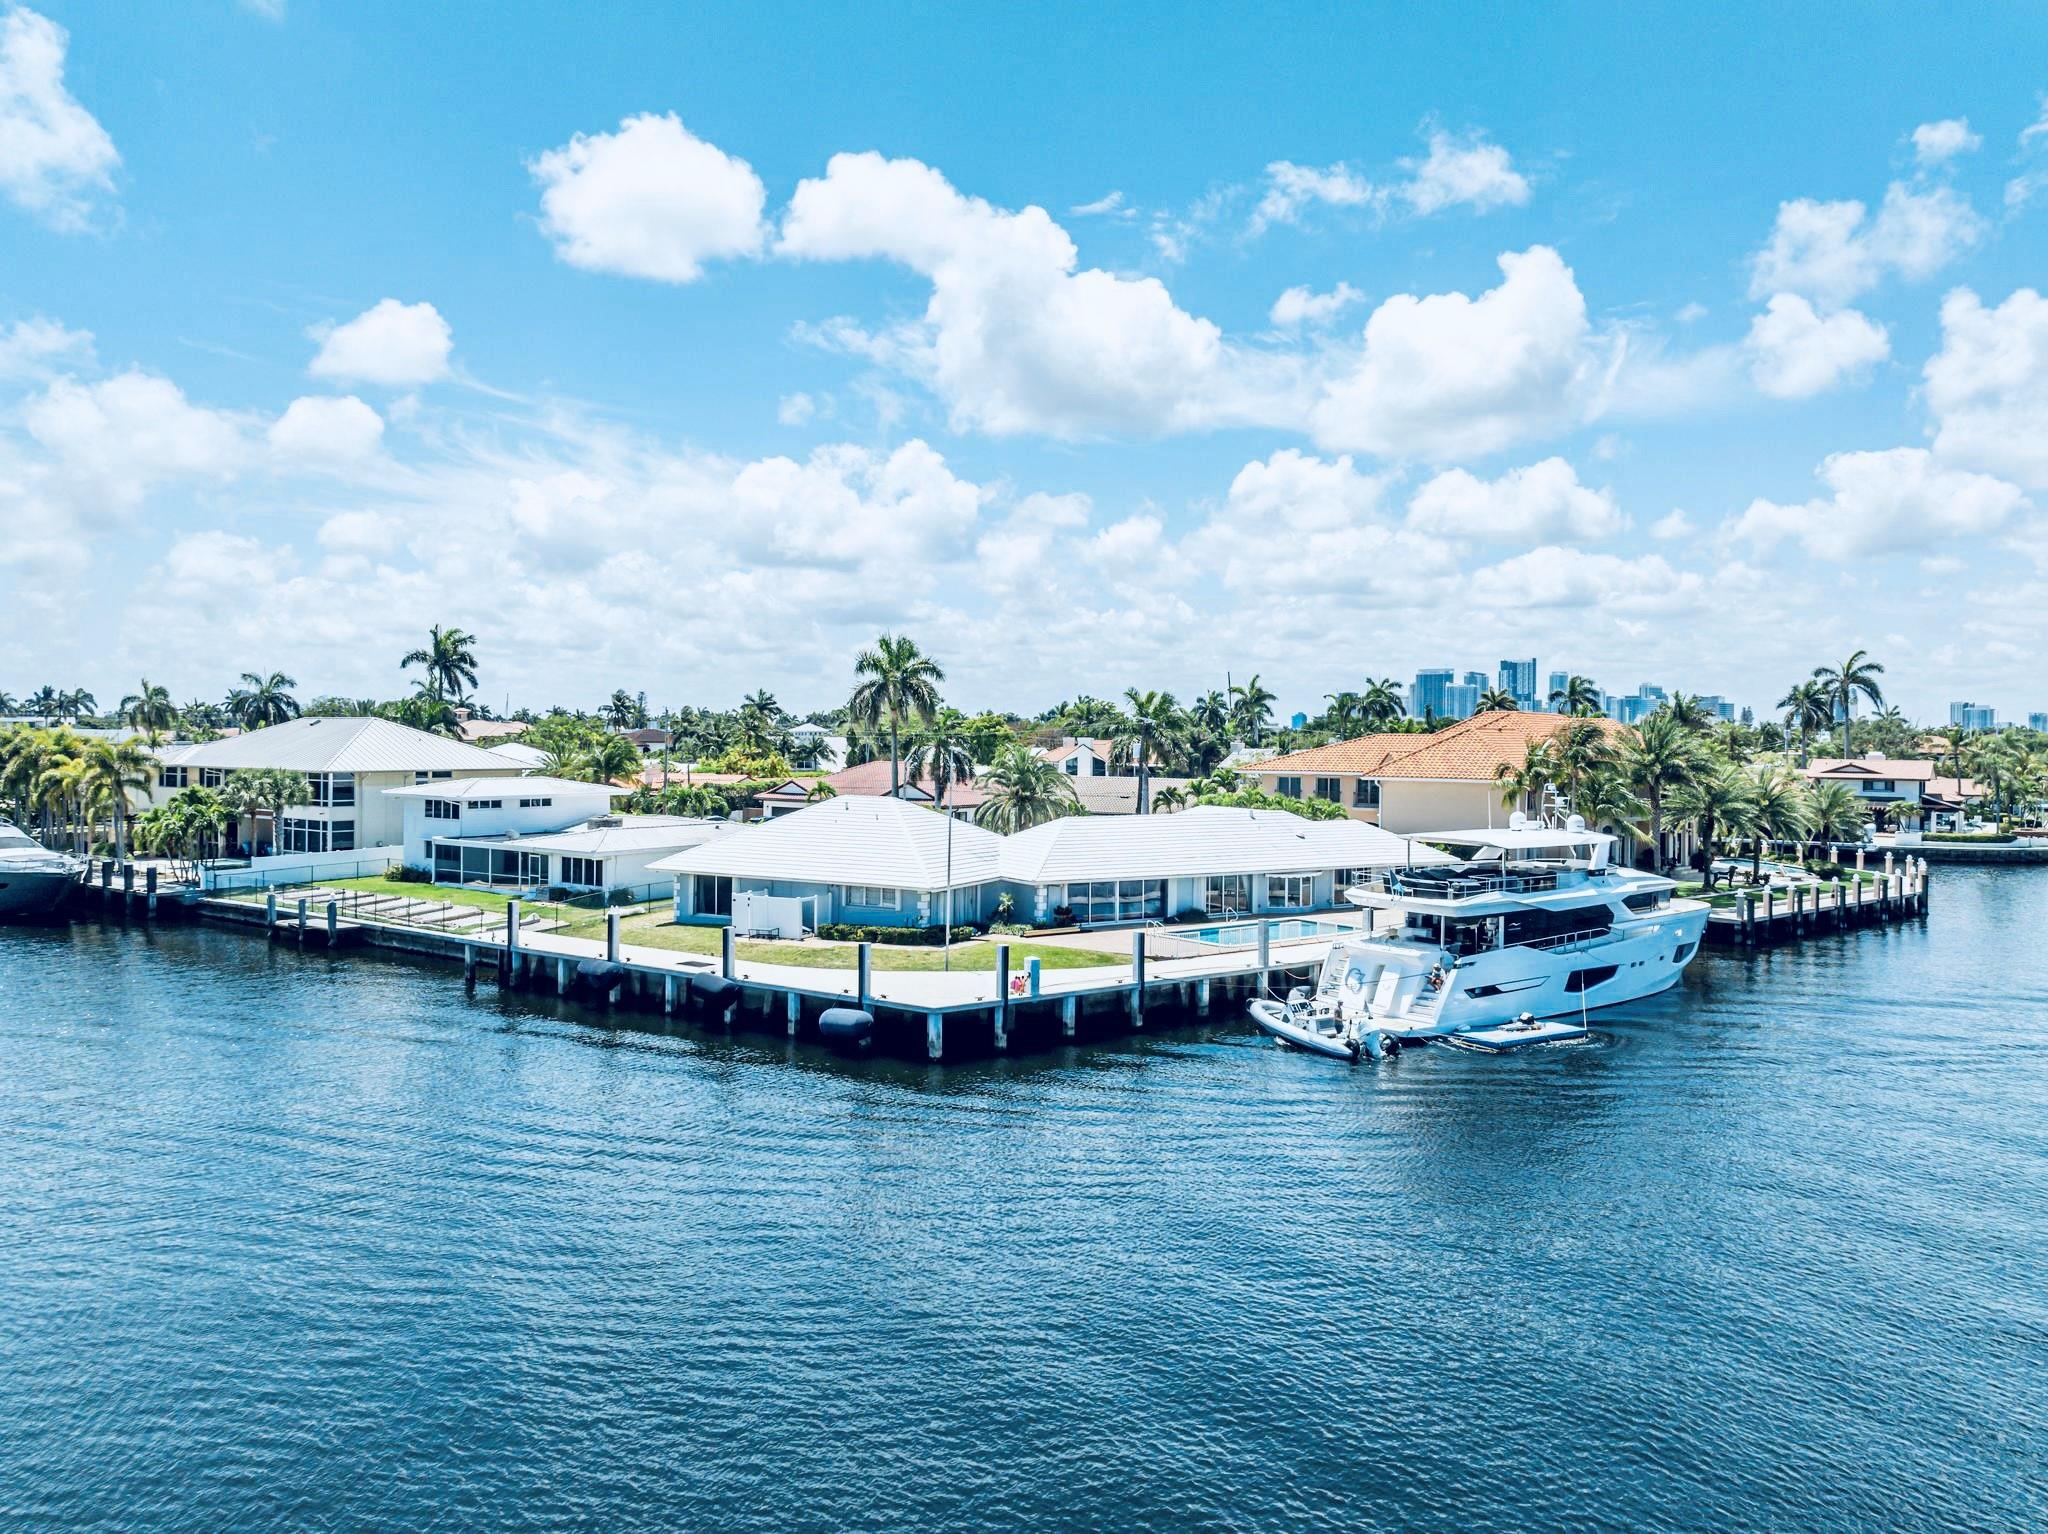 RARE OVERSIZED POINT LOT! DOCK 2 MEGA-YACHTS! LAND SALE. 345' deepest waterfront in Ft Lauderdale (10'+ @MLT) STRAIGHT LINE DOCKAGE for yacht up to 164' +/-, plus room for smaller boats. 2 combined lots are 26,000 SF. EXPANSIVE PANORAMIC VIEWS! Sunrise Key, the next Harbor Beach, is quiet, secure, gated, all-waterfront community near Las Olas. Architectural plans by renowned architect included (15,000 SF 3-story, 7 BR, 10+ car garage, gym, gun range, 2 offices, 3rd floor pool/spa, party room + kitchen). New seawall & dock has large cleats & four 200 amp power stations. LAND SALE but two homes on property are livable + garages & pool. Near Las Olas & easy access to shopping, beaches & best private school in South Florida. THIS HAS IT ALL!  PLEASE DO NOT GO ON PROPERTY WITHOUT LISTING AGENT.